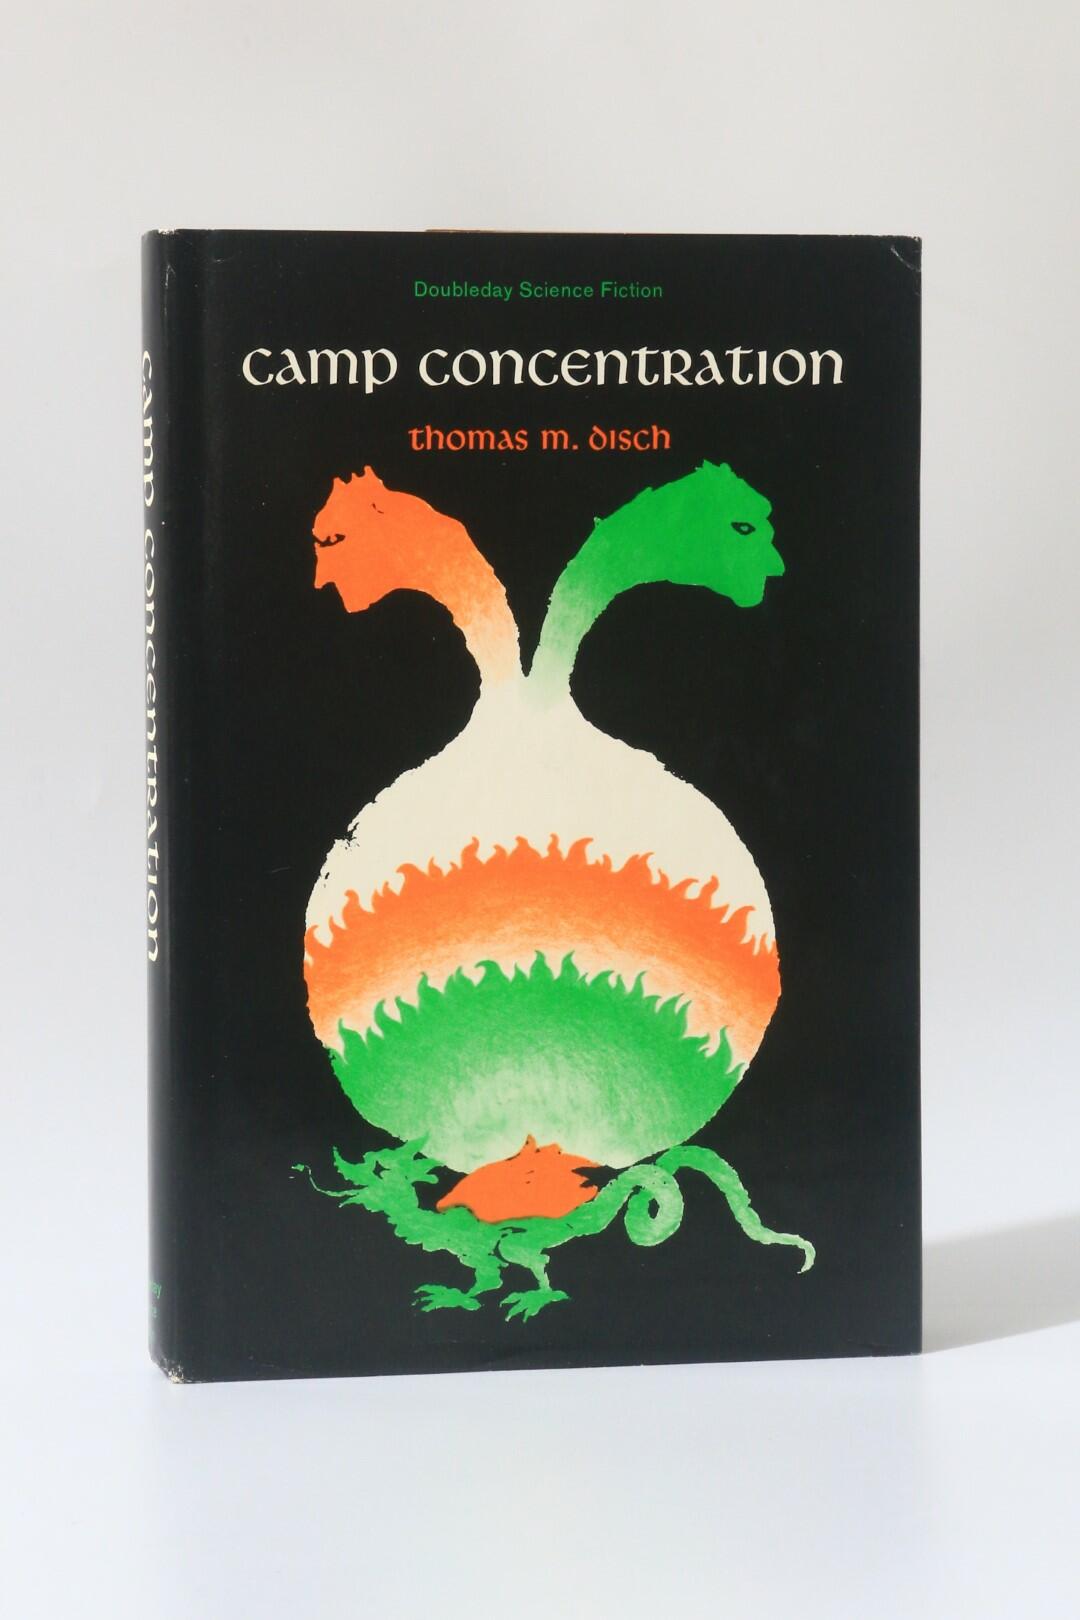 Thomas M. Disch - Camp Concentration - Doubleday, 1969, First Edition.